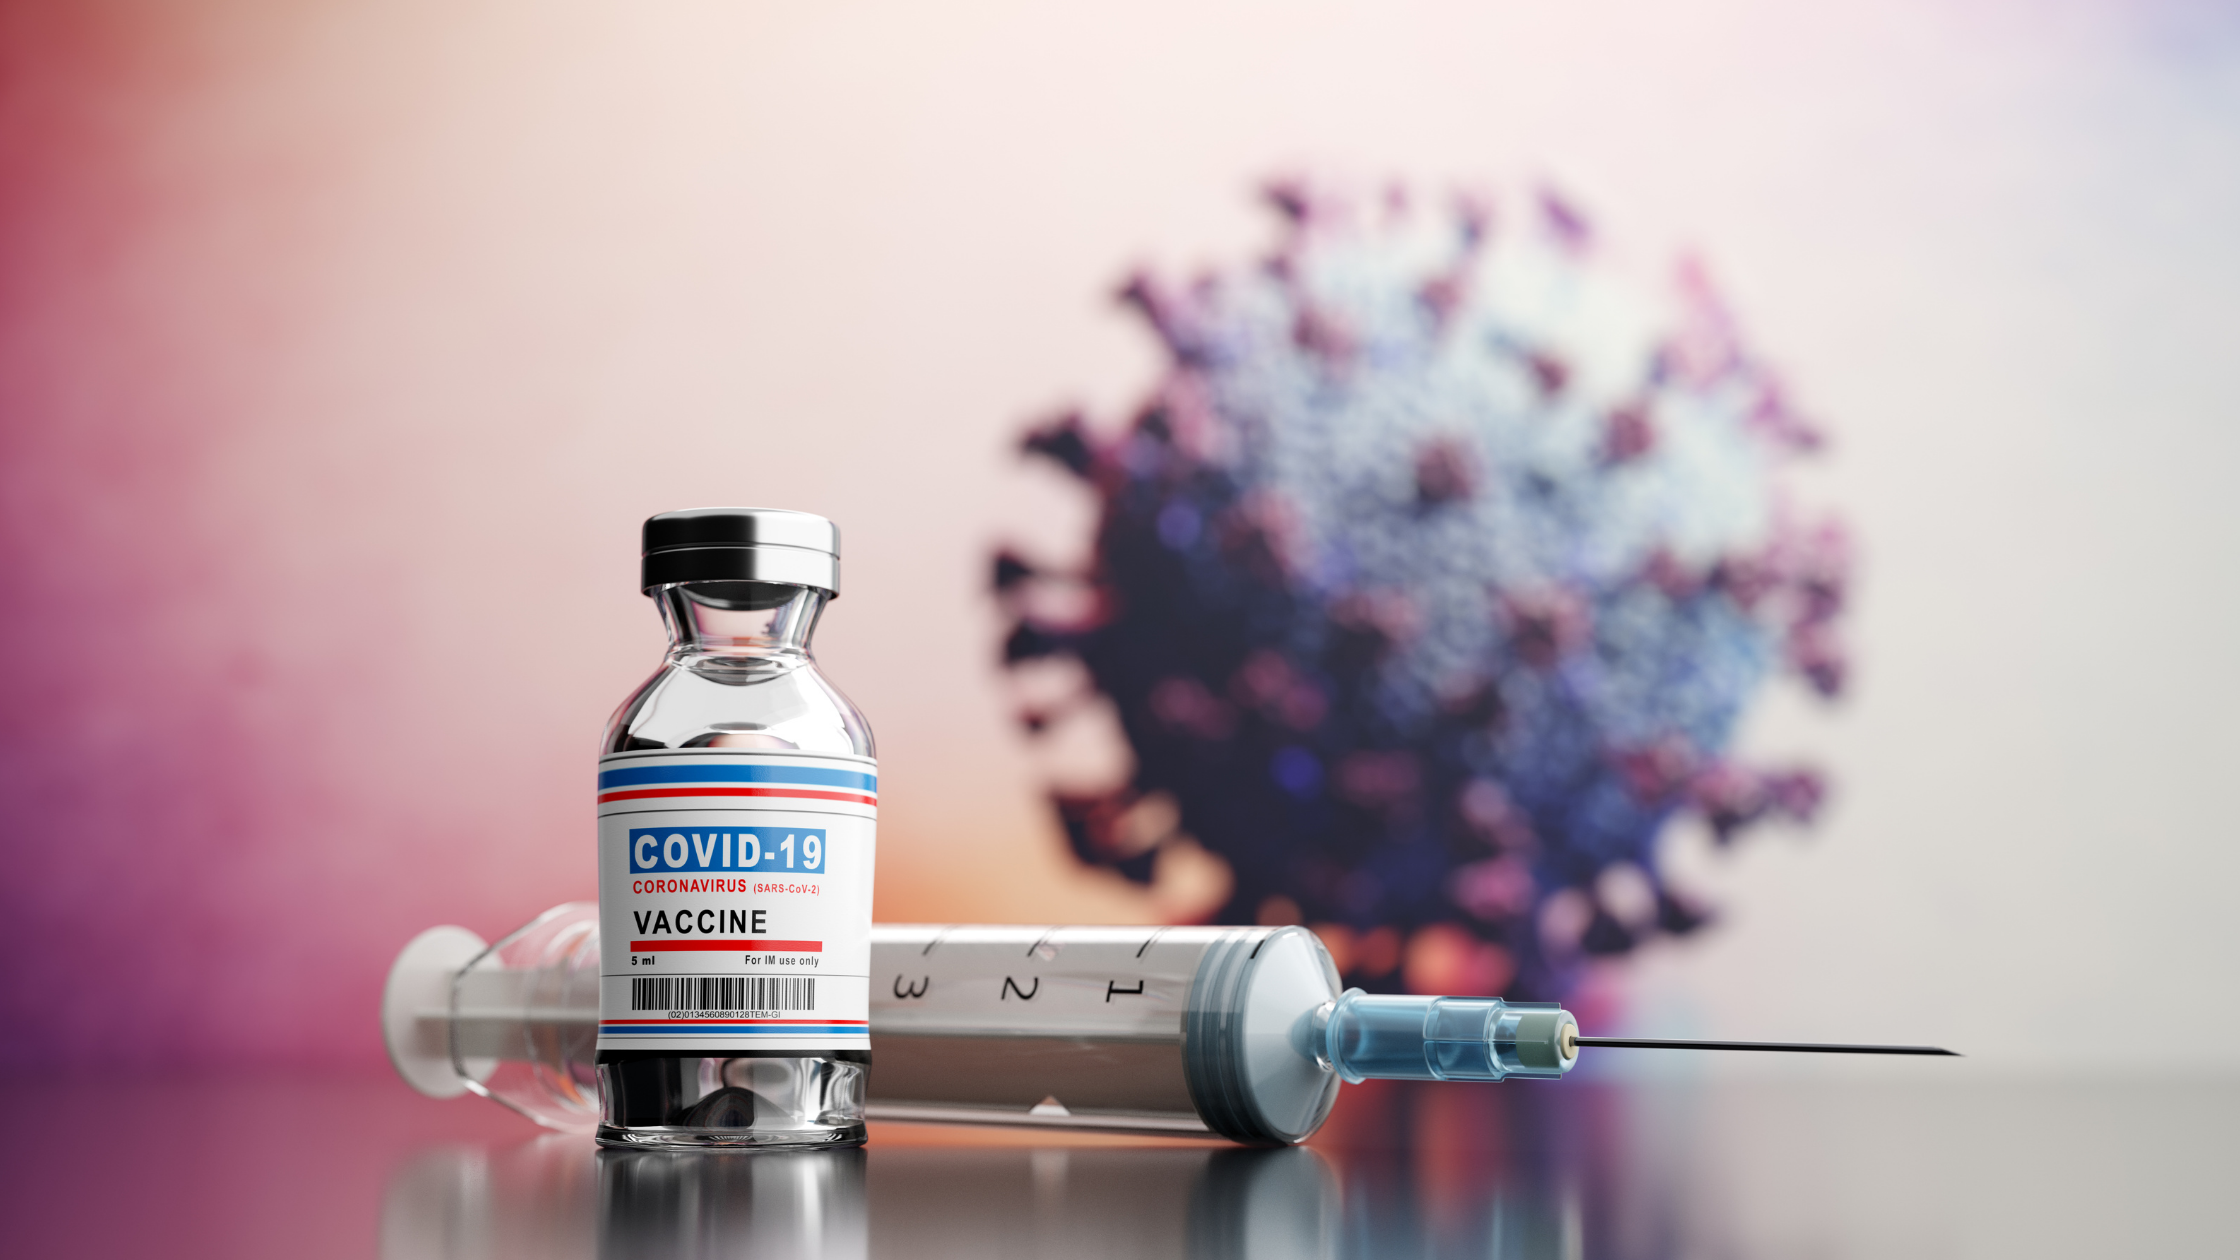 a bottle of covid-19 vaccine next to a syringe